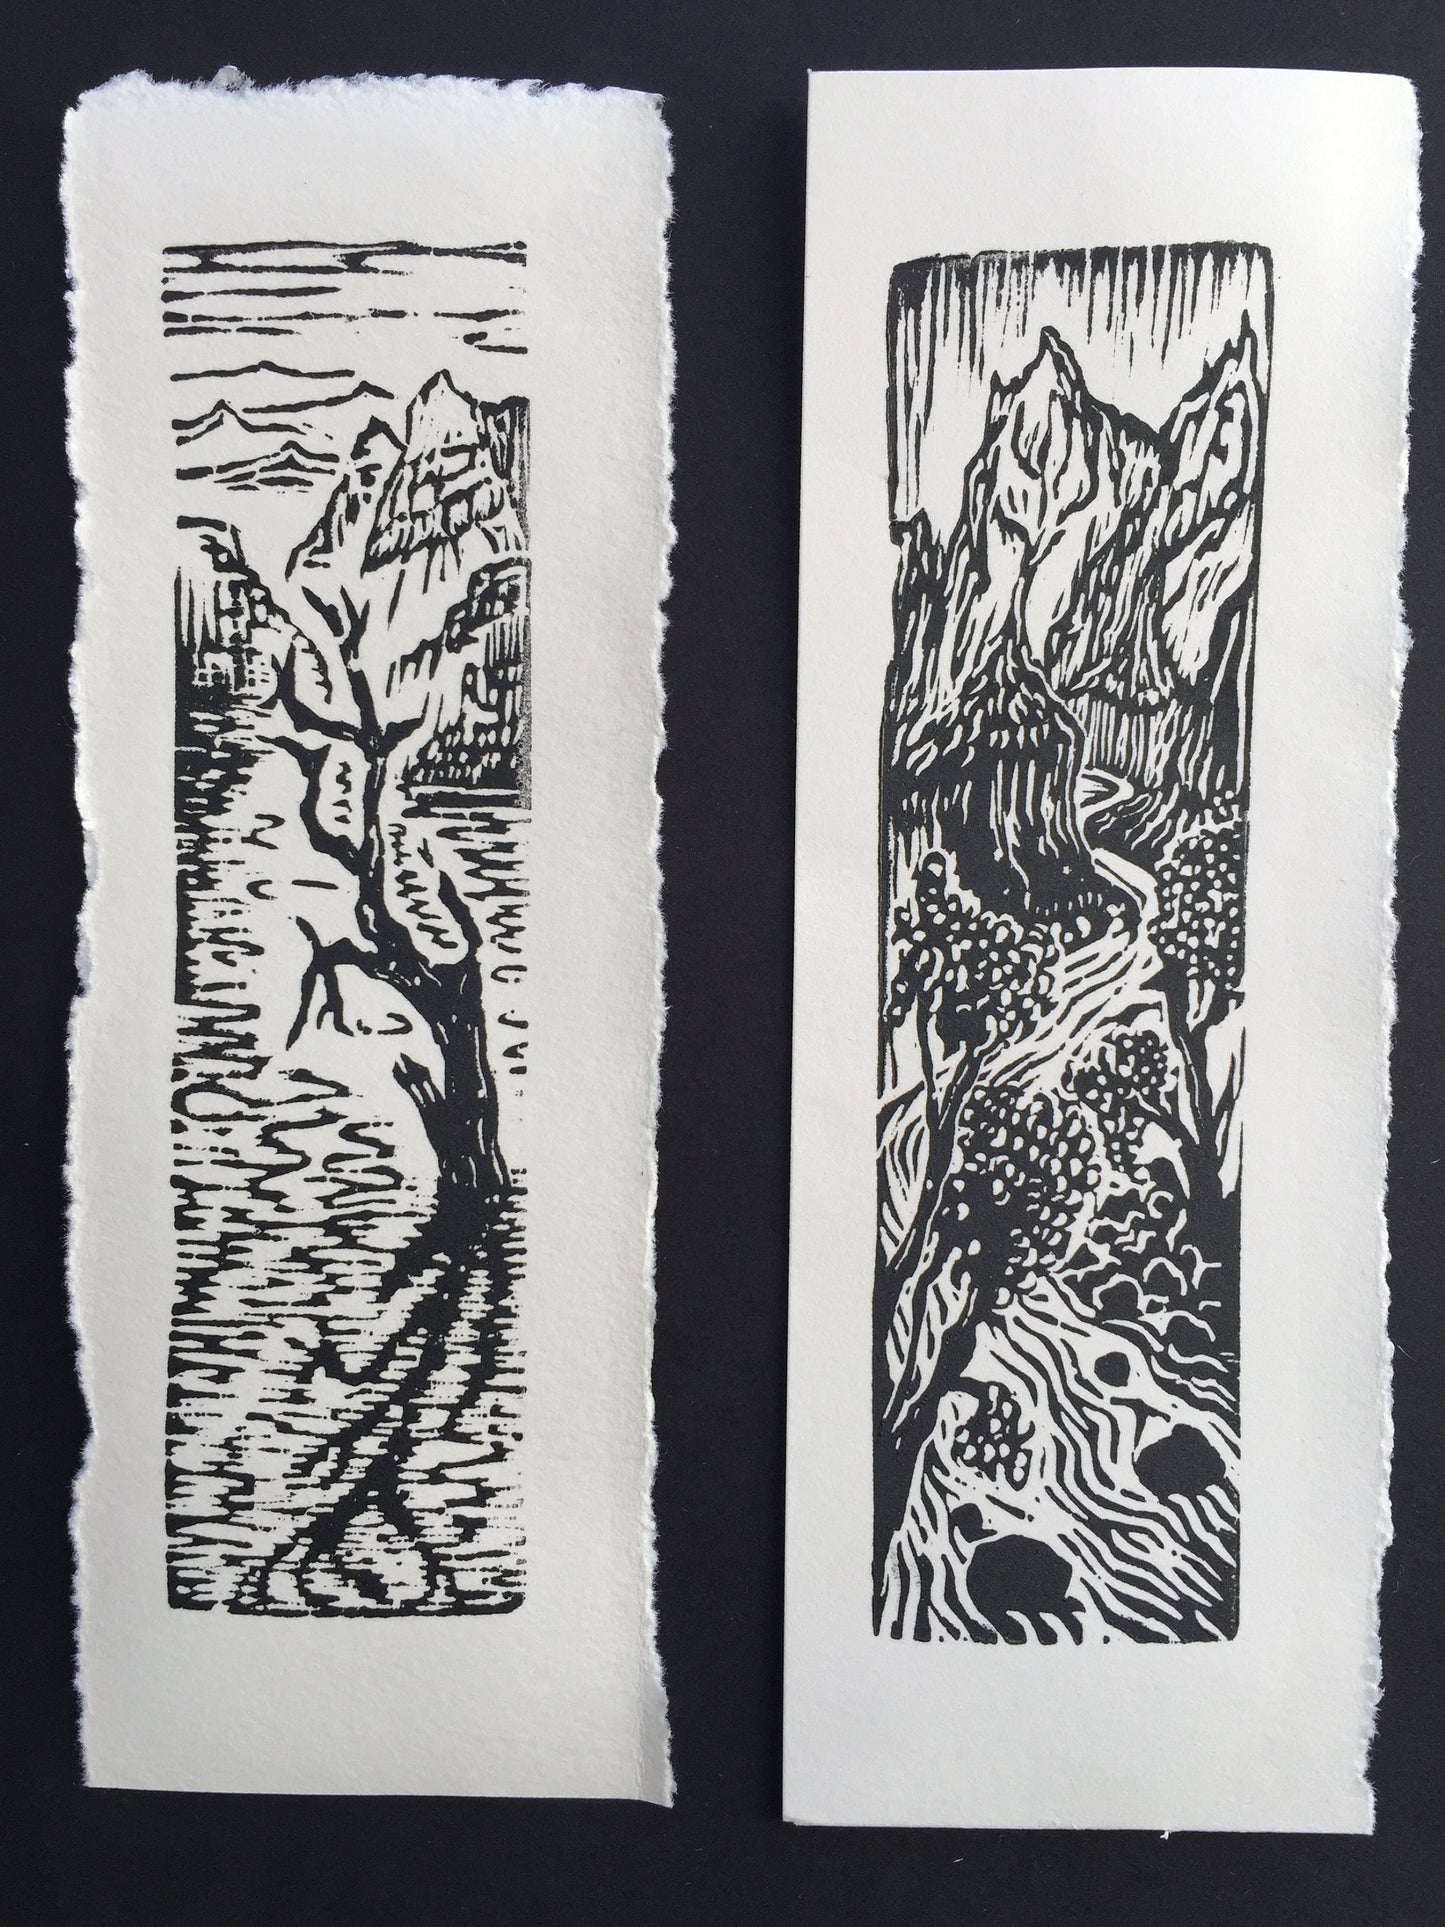 SET 4 Original Woodcut Prints Water in the Desert Landscape Collection